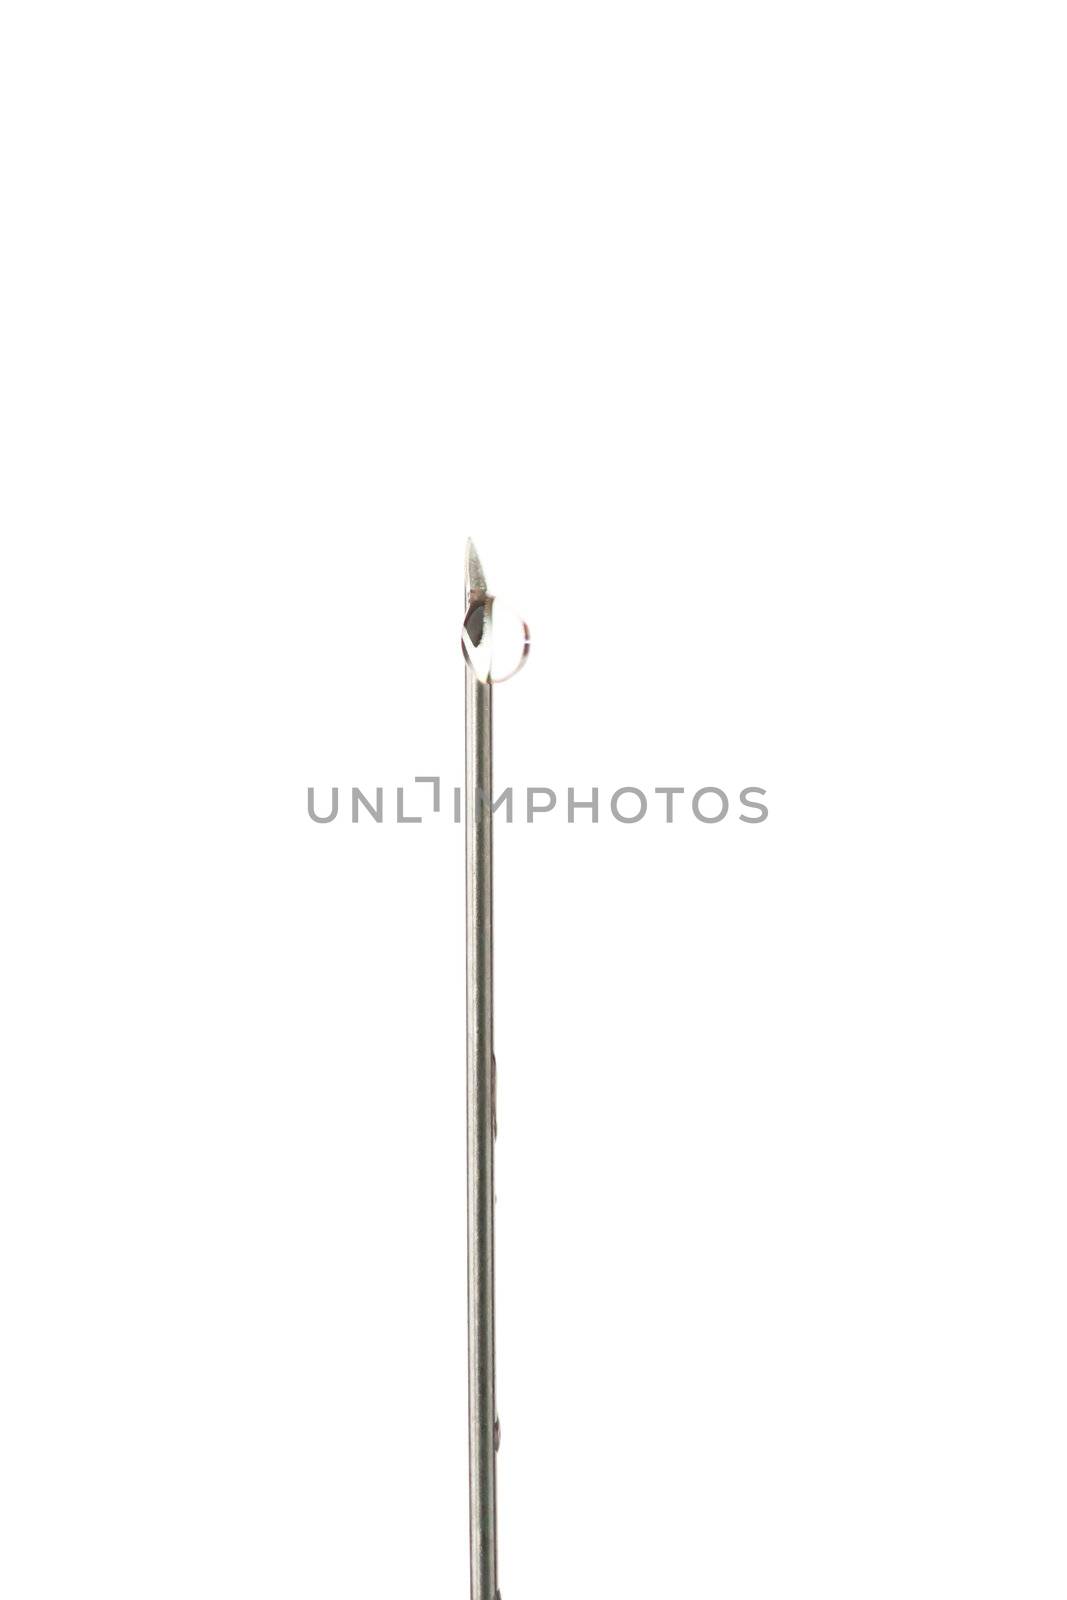 Drop outgoing of a needle against white background